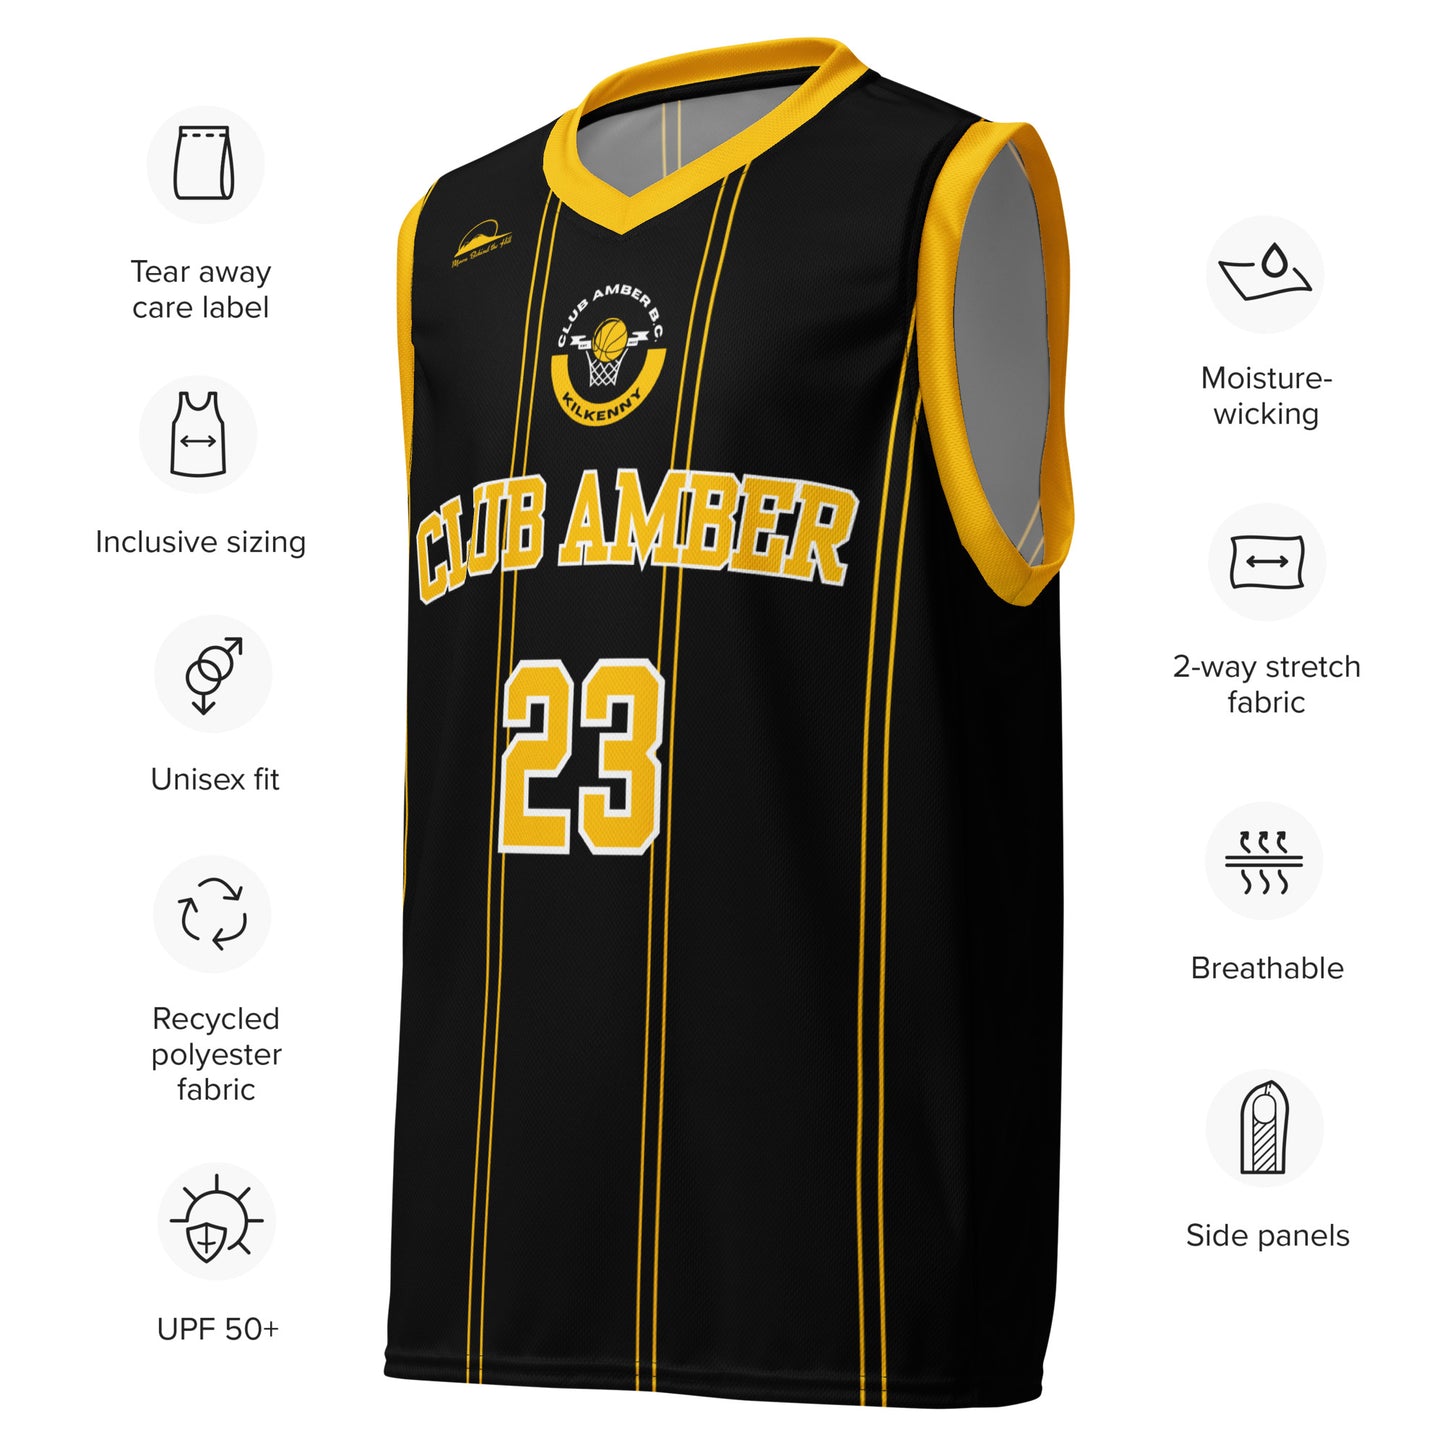 Club Amber #23 Unisex Basketball Jersey 2023 - Designed by Moon Behind The Hill Available to Buy at a Discounted Price on Moon Behind The Hill Online Designer Discount Store